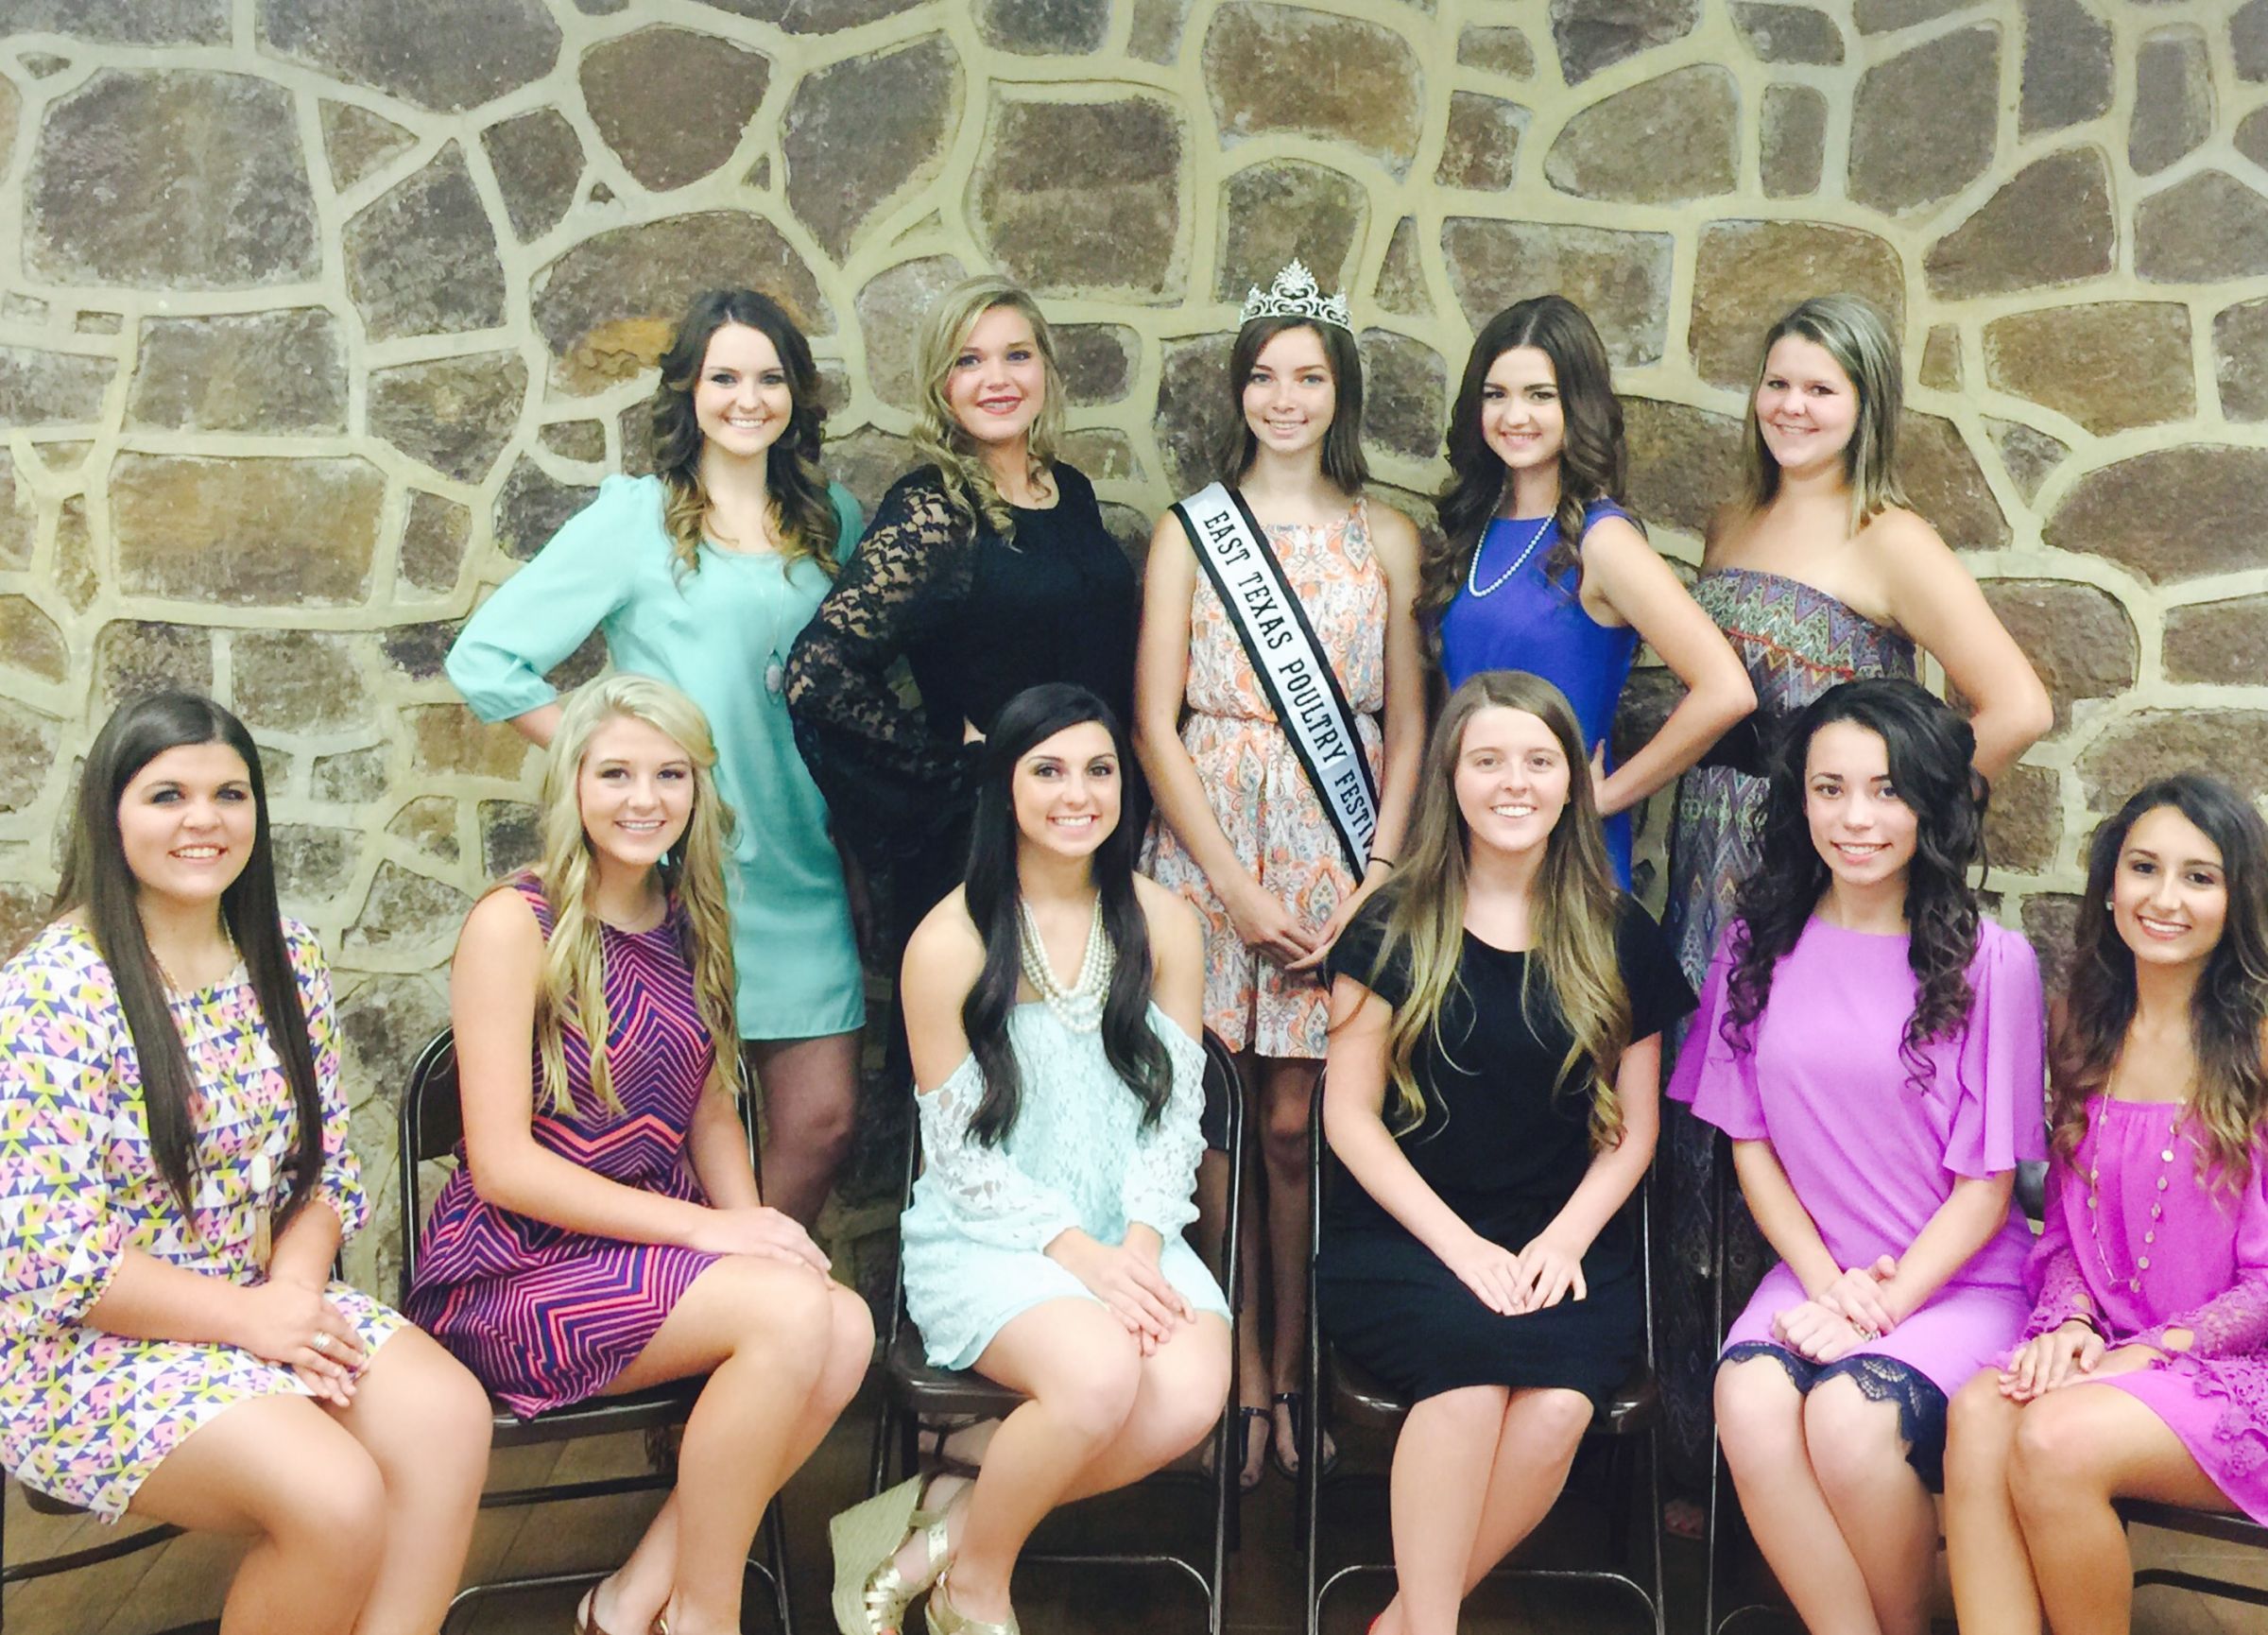 EAST TEXAS POULTRY FESTIVAL PAGEANT QUEEN’S COURT PARTY